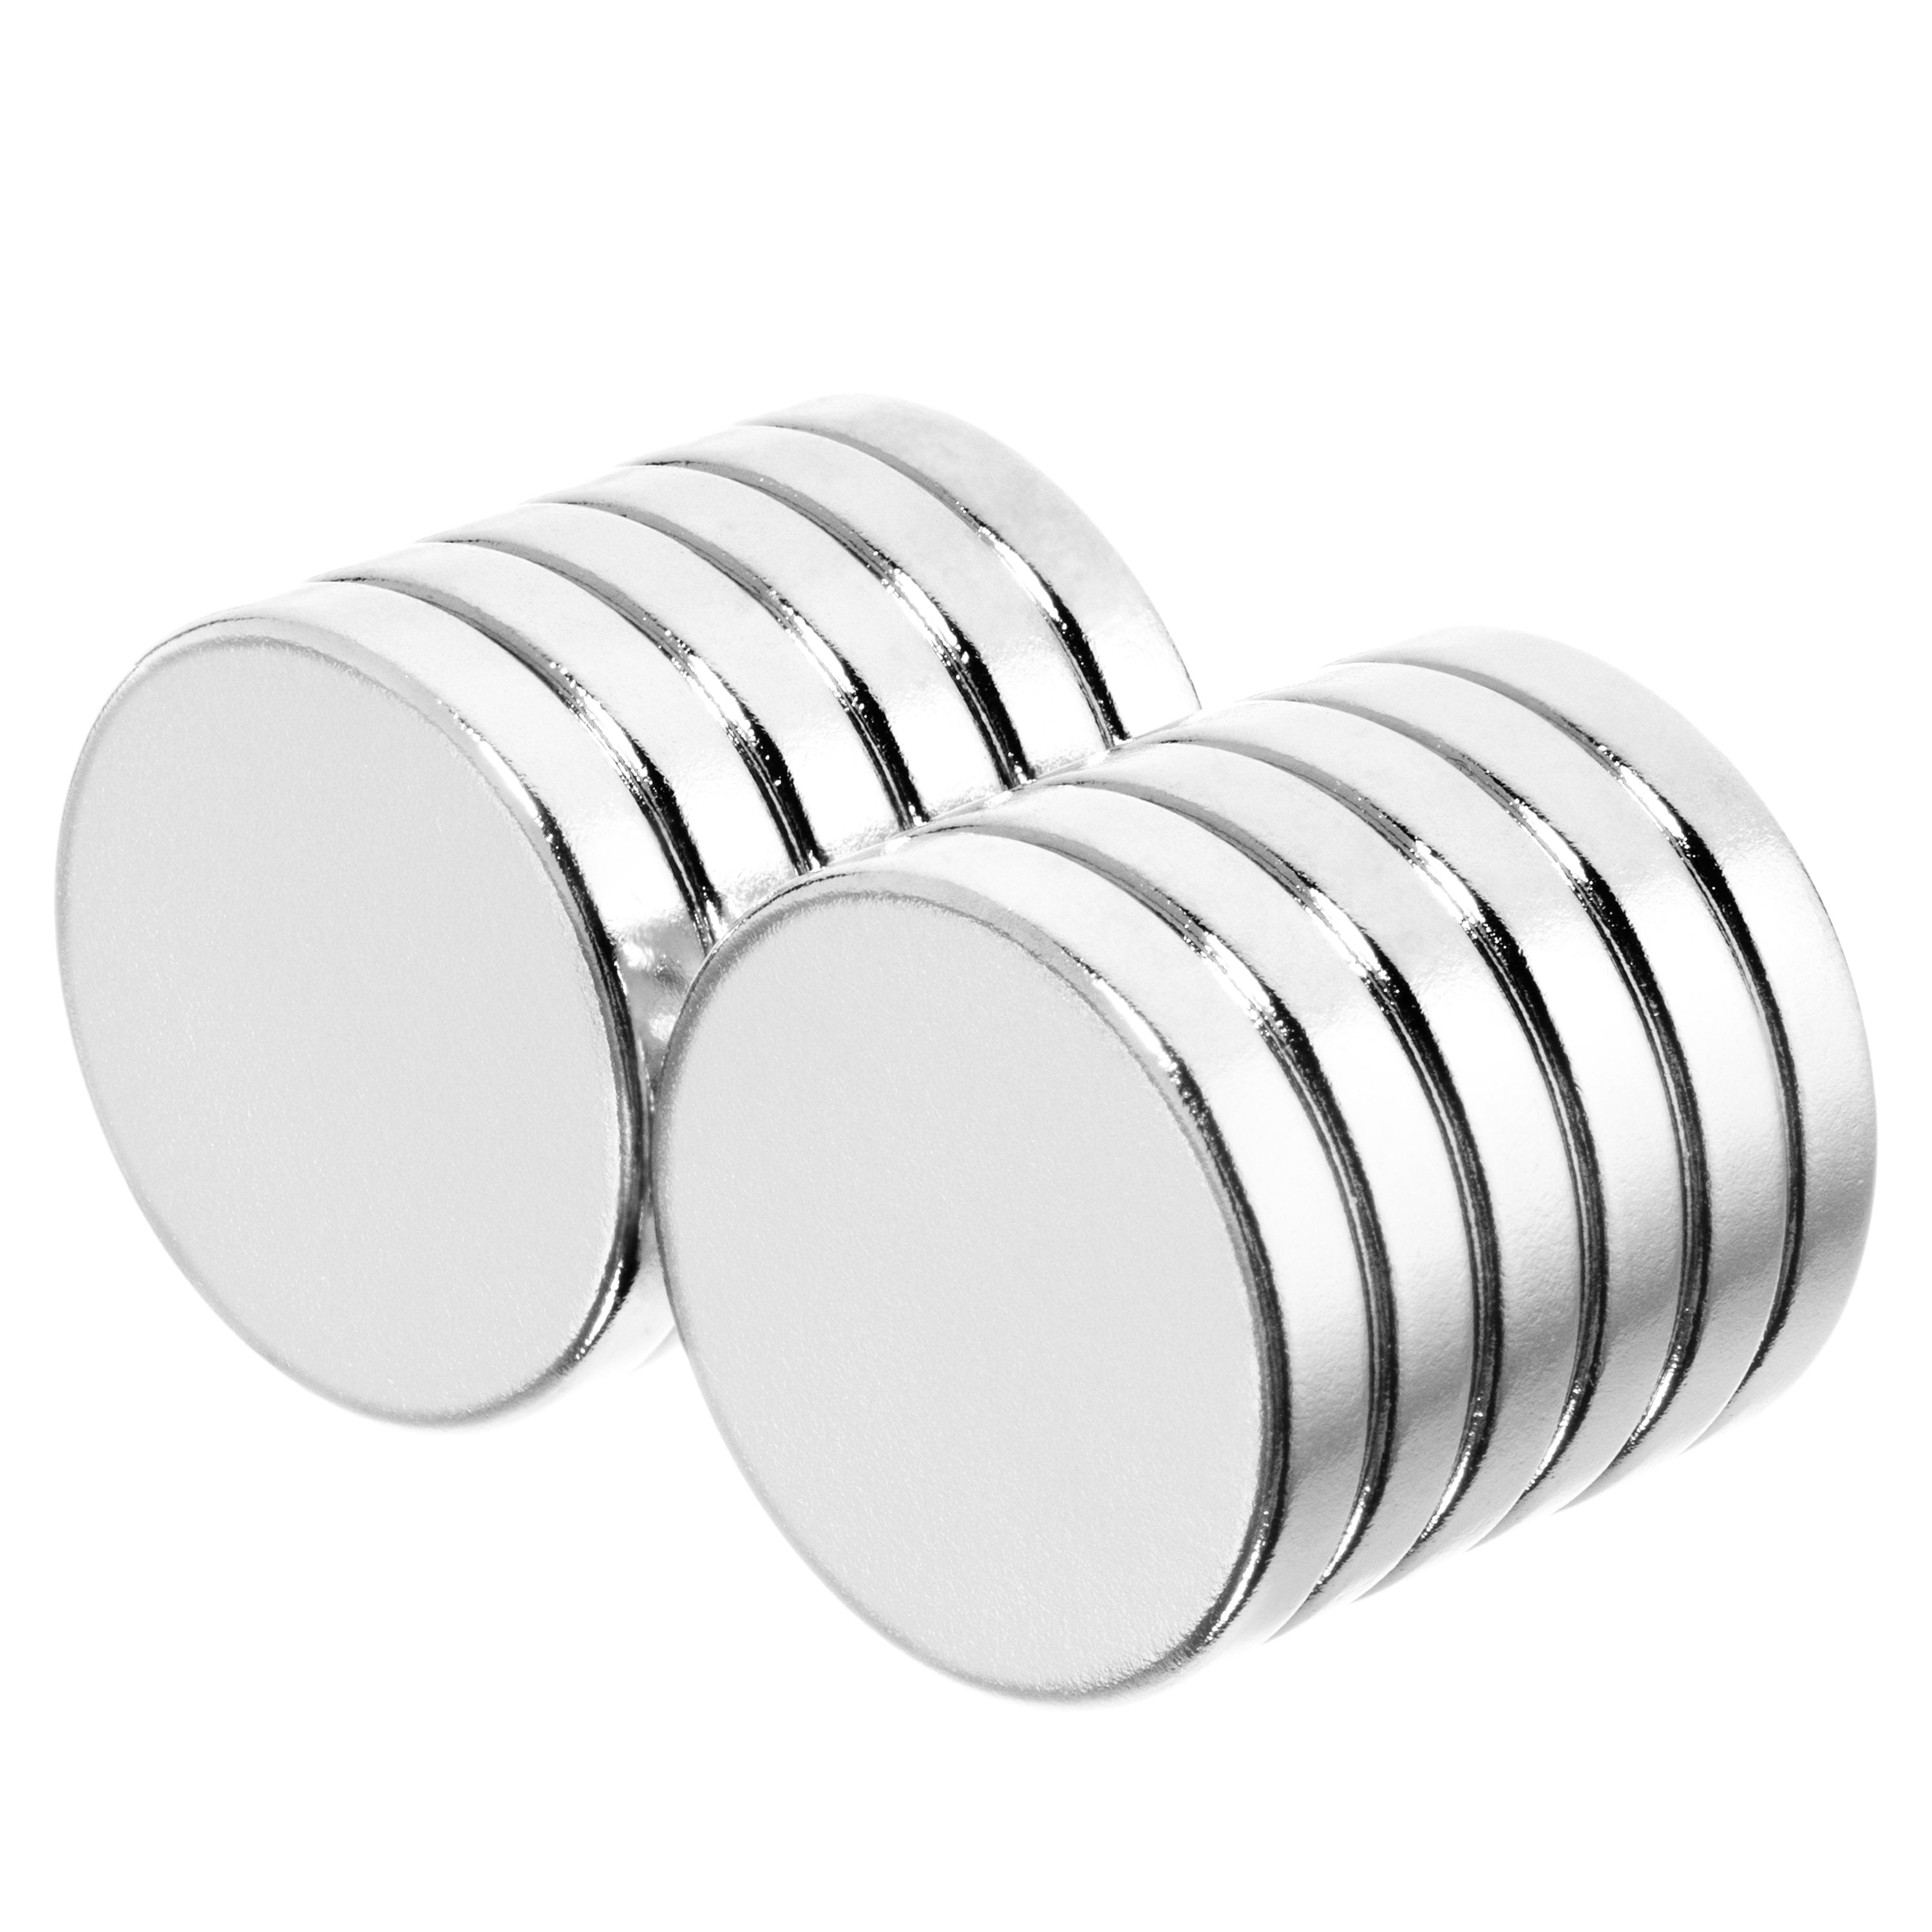 20 Pack 1/2 x 1/4 x 1/8 Inch Strong Neodymium Rare Earth Ring Magnets N52 